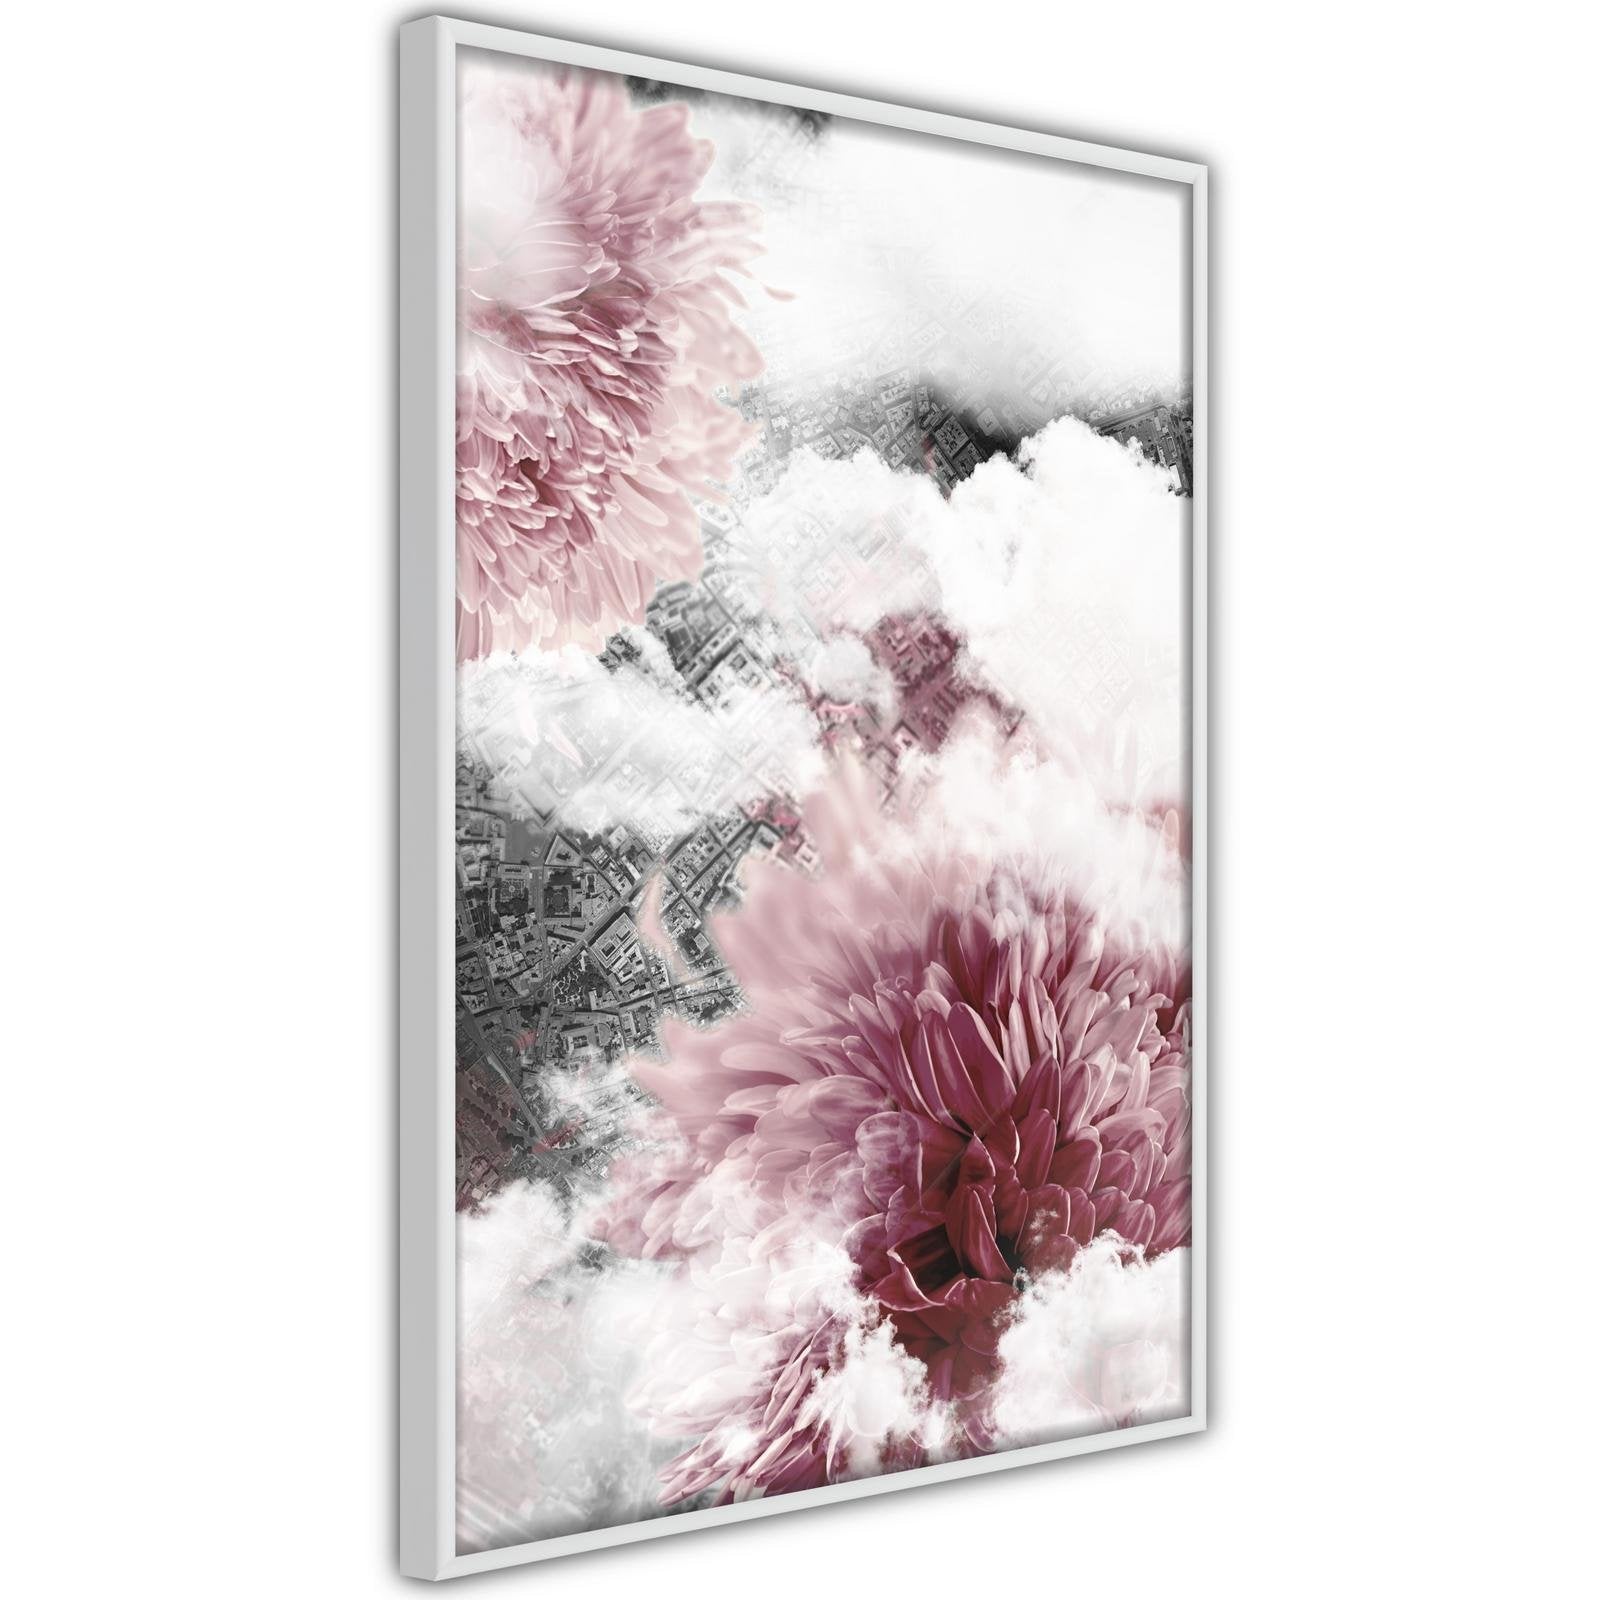 Inramad Poster / Tavla - Flowers in the Sky-Poster Inramad-Artgeist-peaceofhome.se